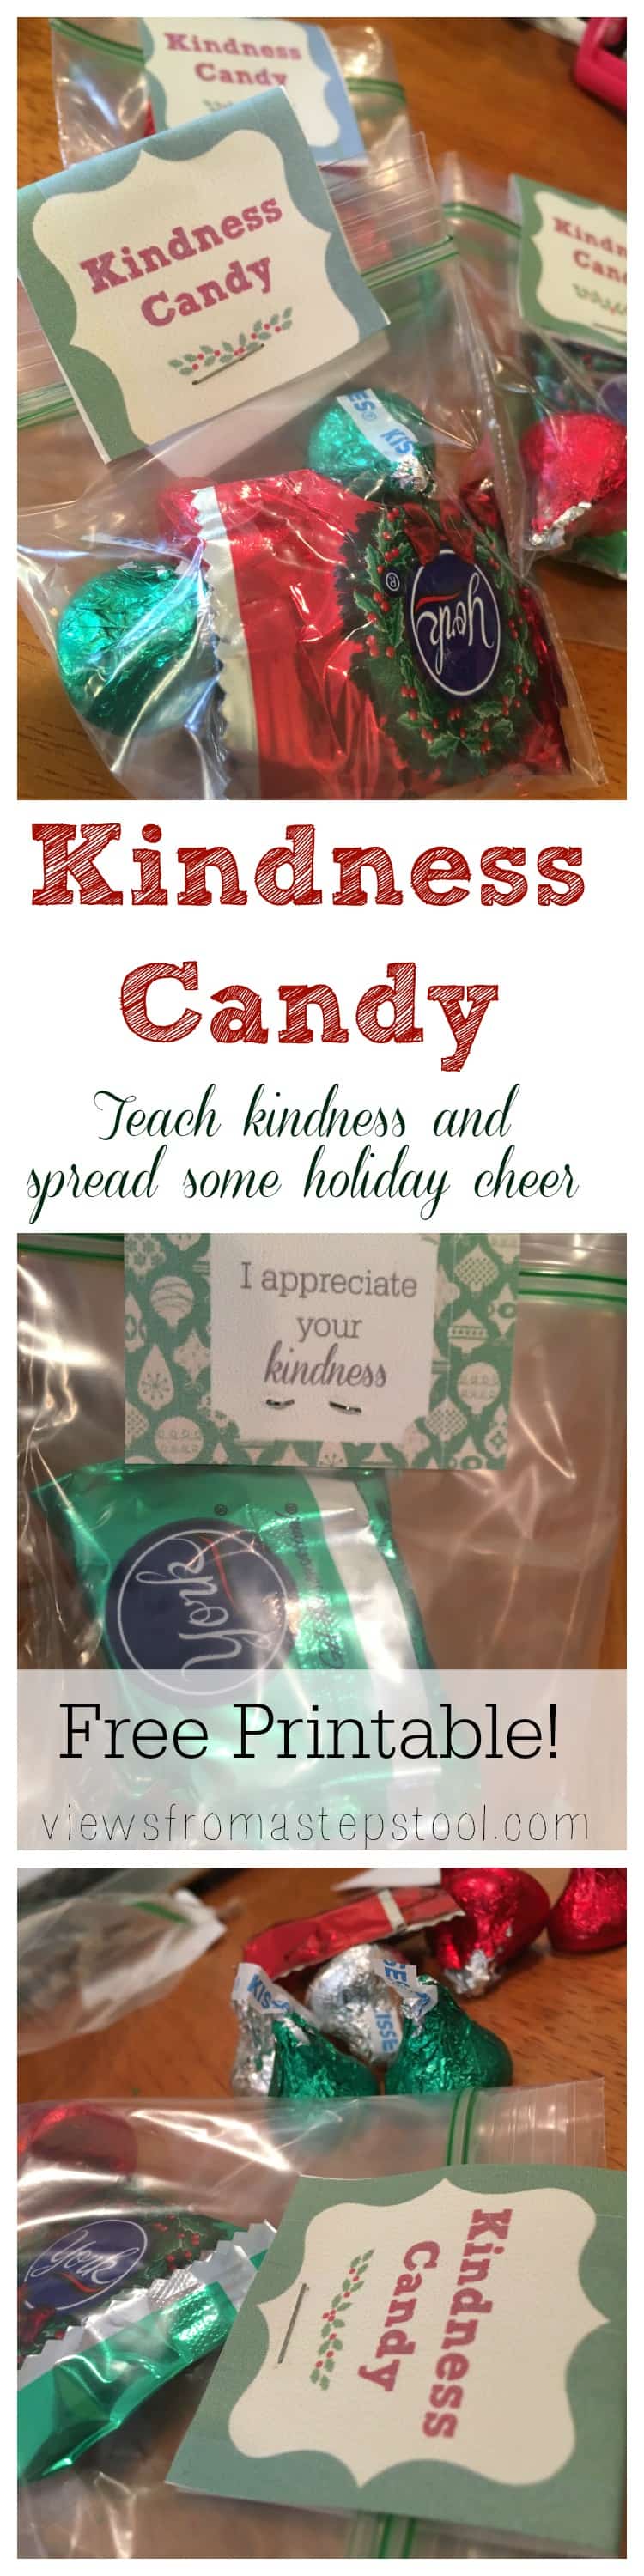 Kindness Candy: Spread Cheer this Holiday Season and Teach Kindness